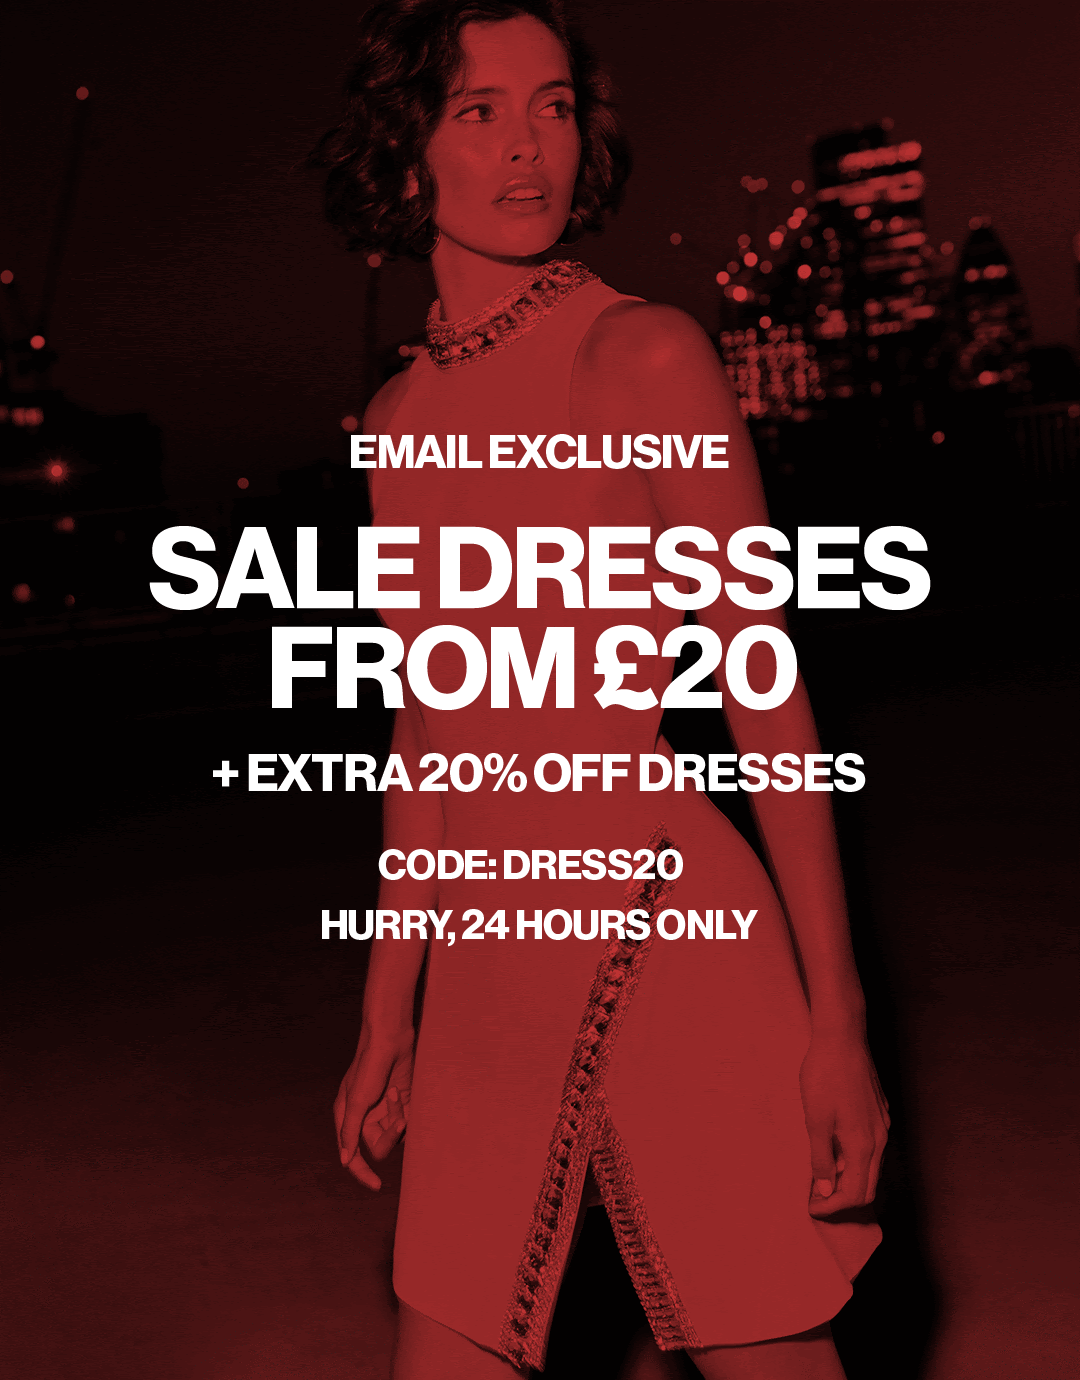 email exclusive Sale dresses from £20 + extra 20% off dresses code: DRESS20 Hurry, 24 hours only